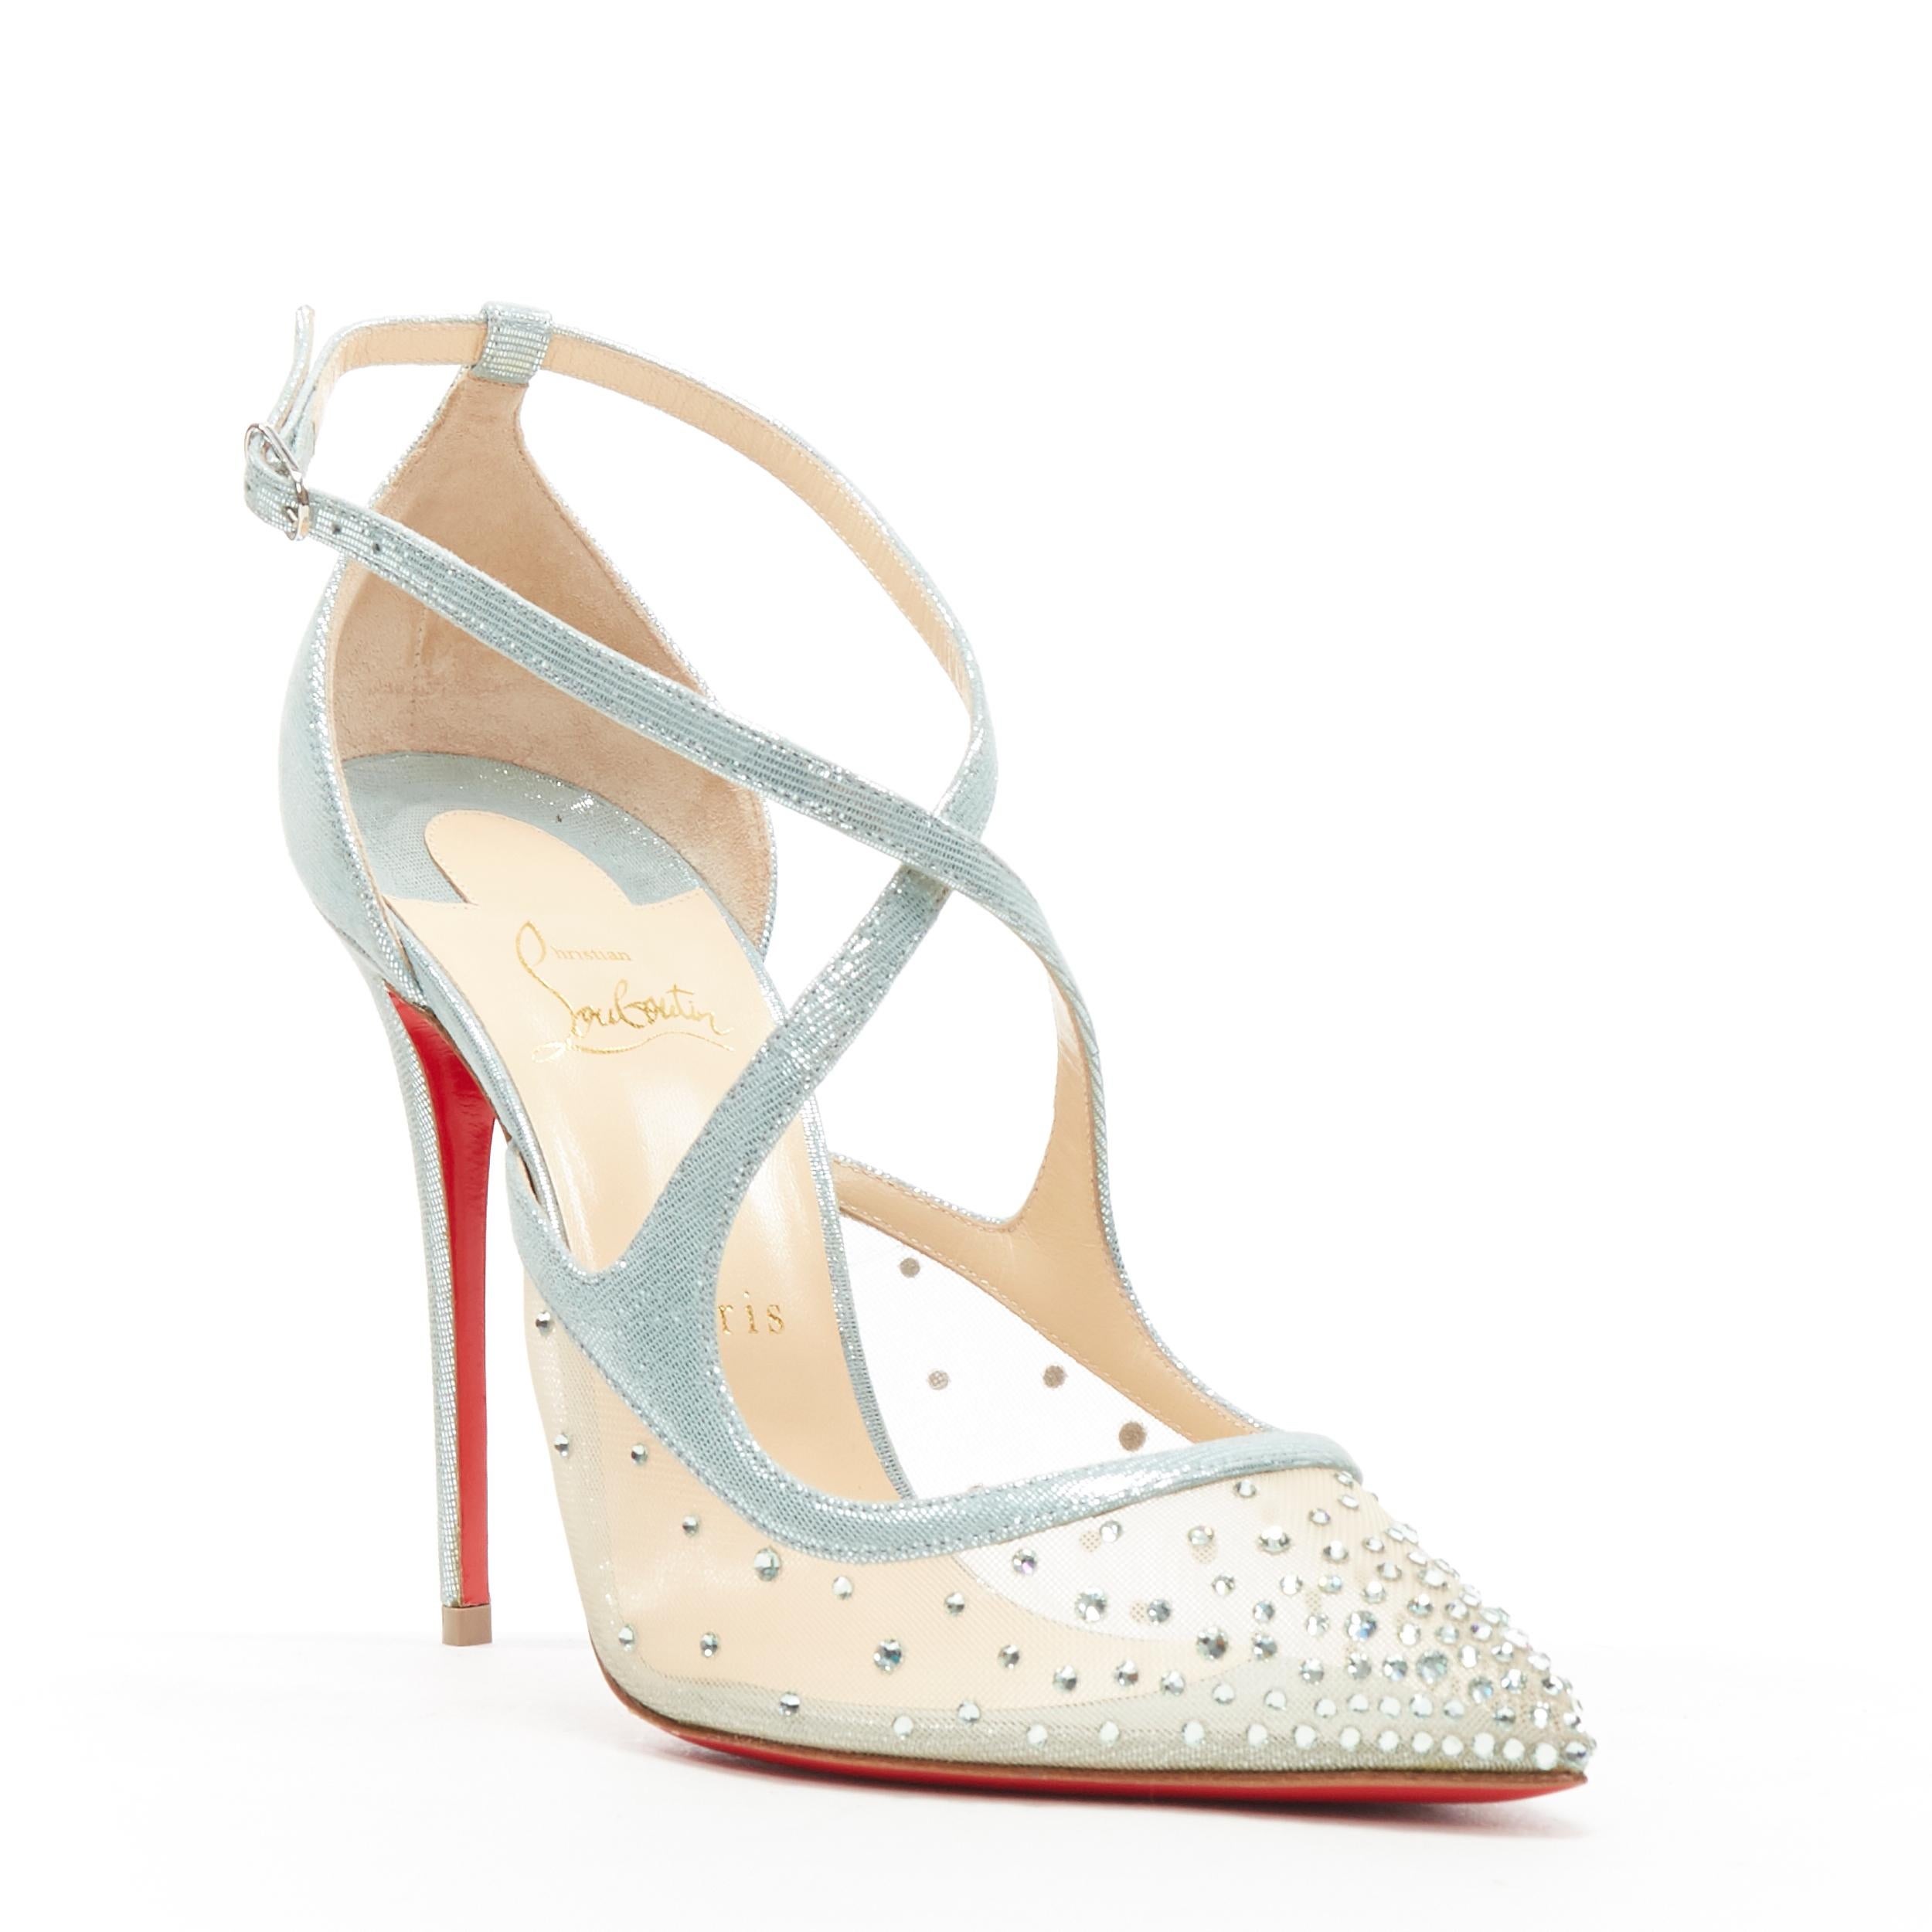 new CHRISTIAN LOUBOUTIN Twistissima Strass 100 blue crystal mesh cross pump EU39
Brand: Christian Louboutin
Designer: Christian Louboutin
Model Name / Style: Twistissima 100
Material: Fabric
Color: Blue
Pattern: Solid
Extra Detail: Style code: